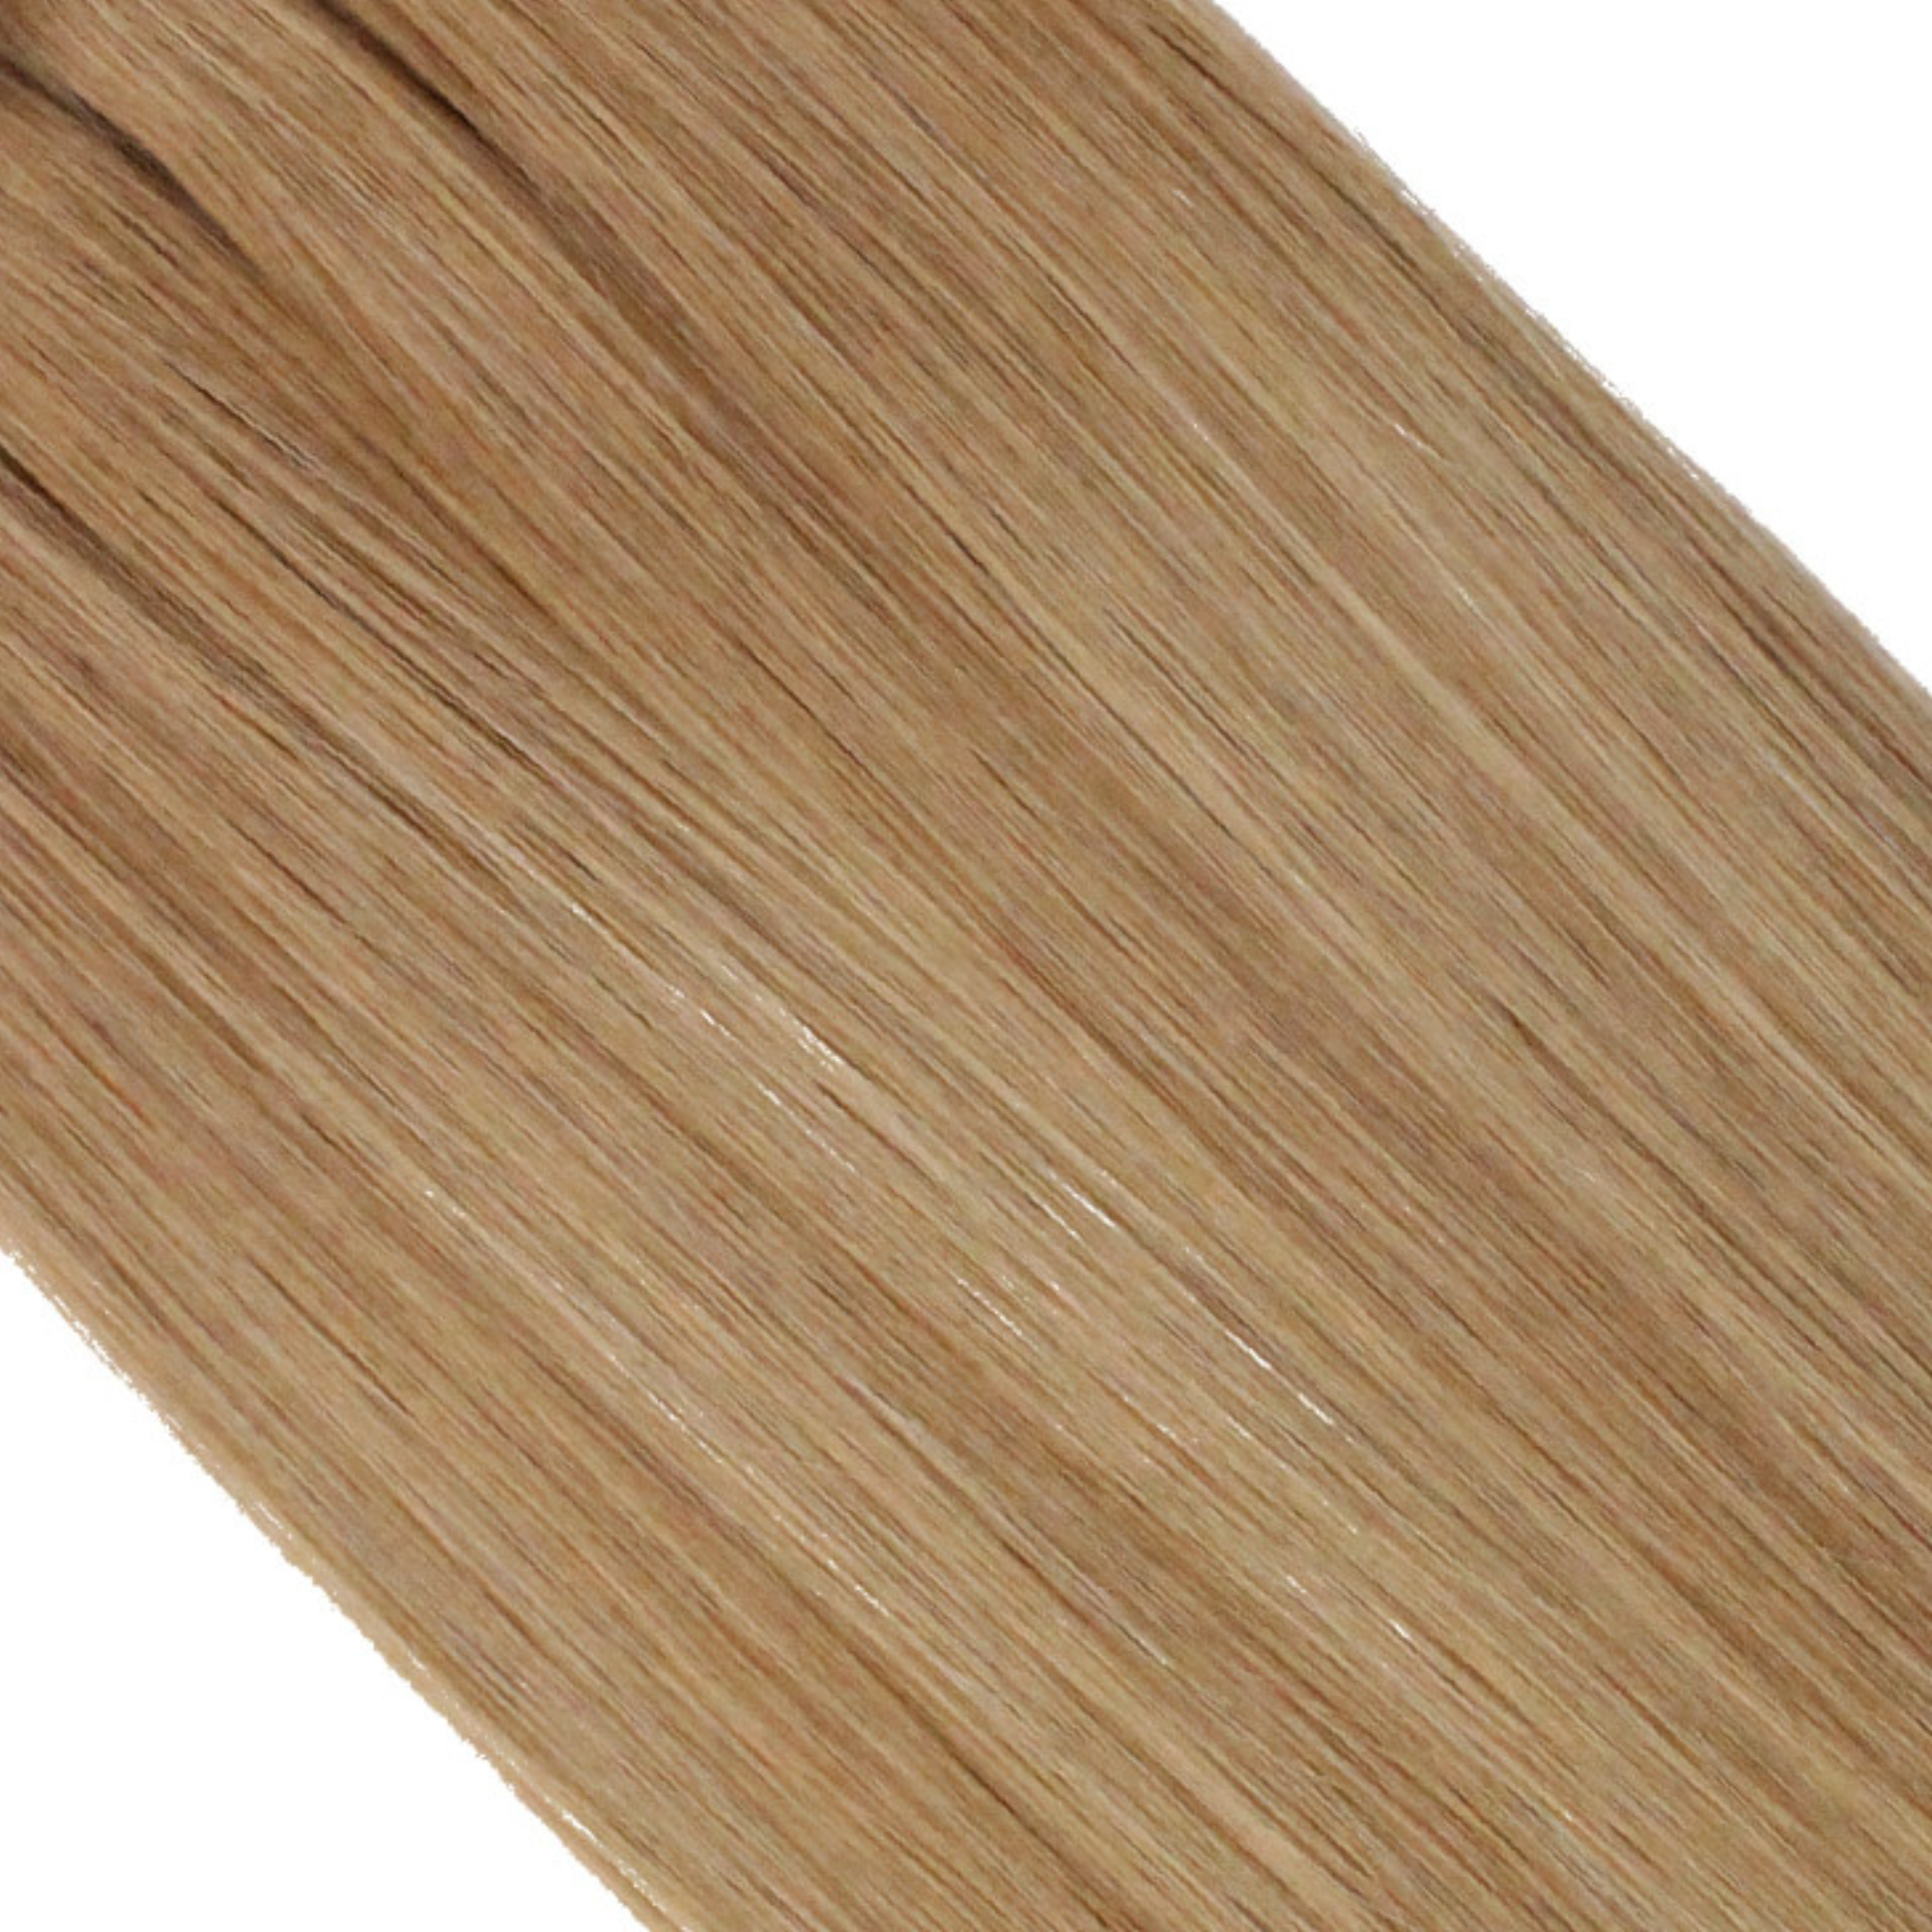 "hair rehab london 22" tape hair extensions shade swatch titled rooted mocha"